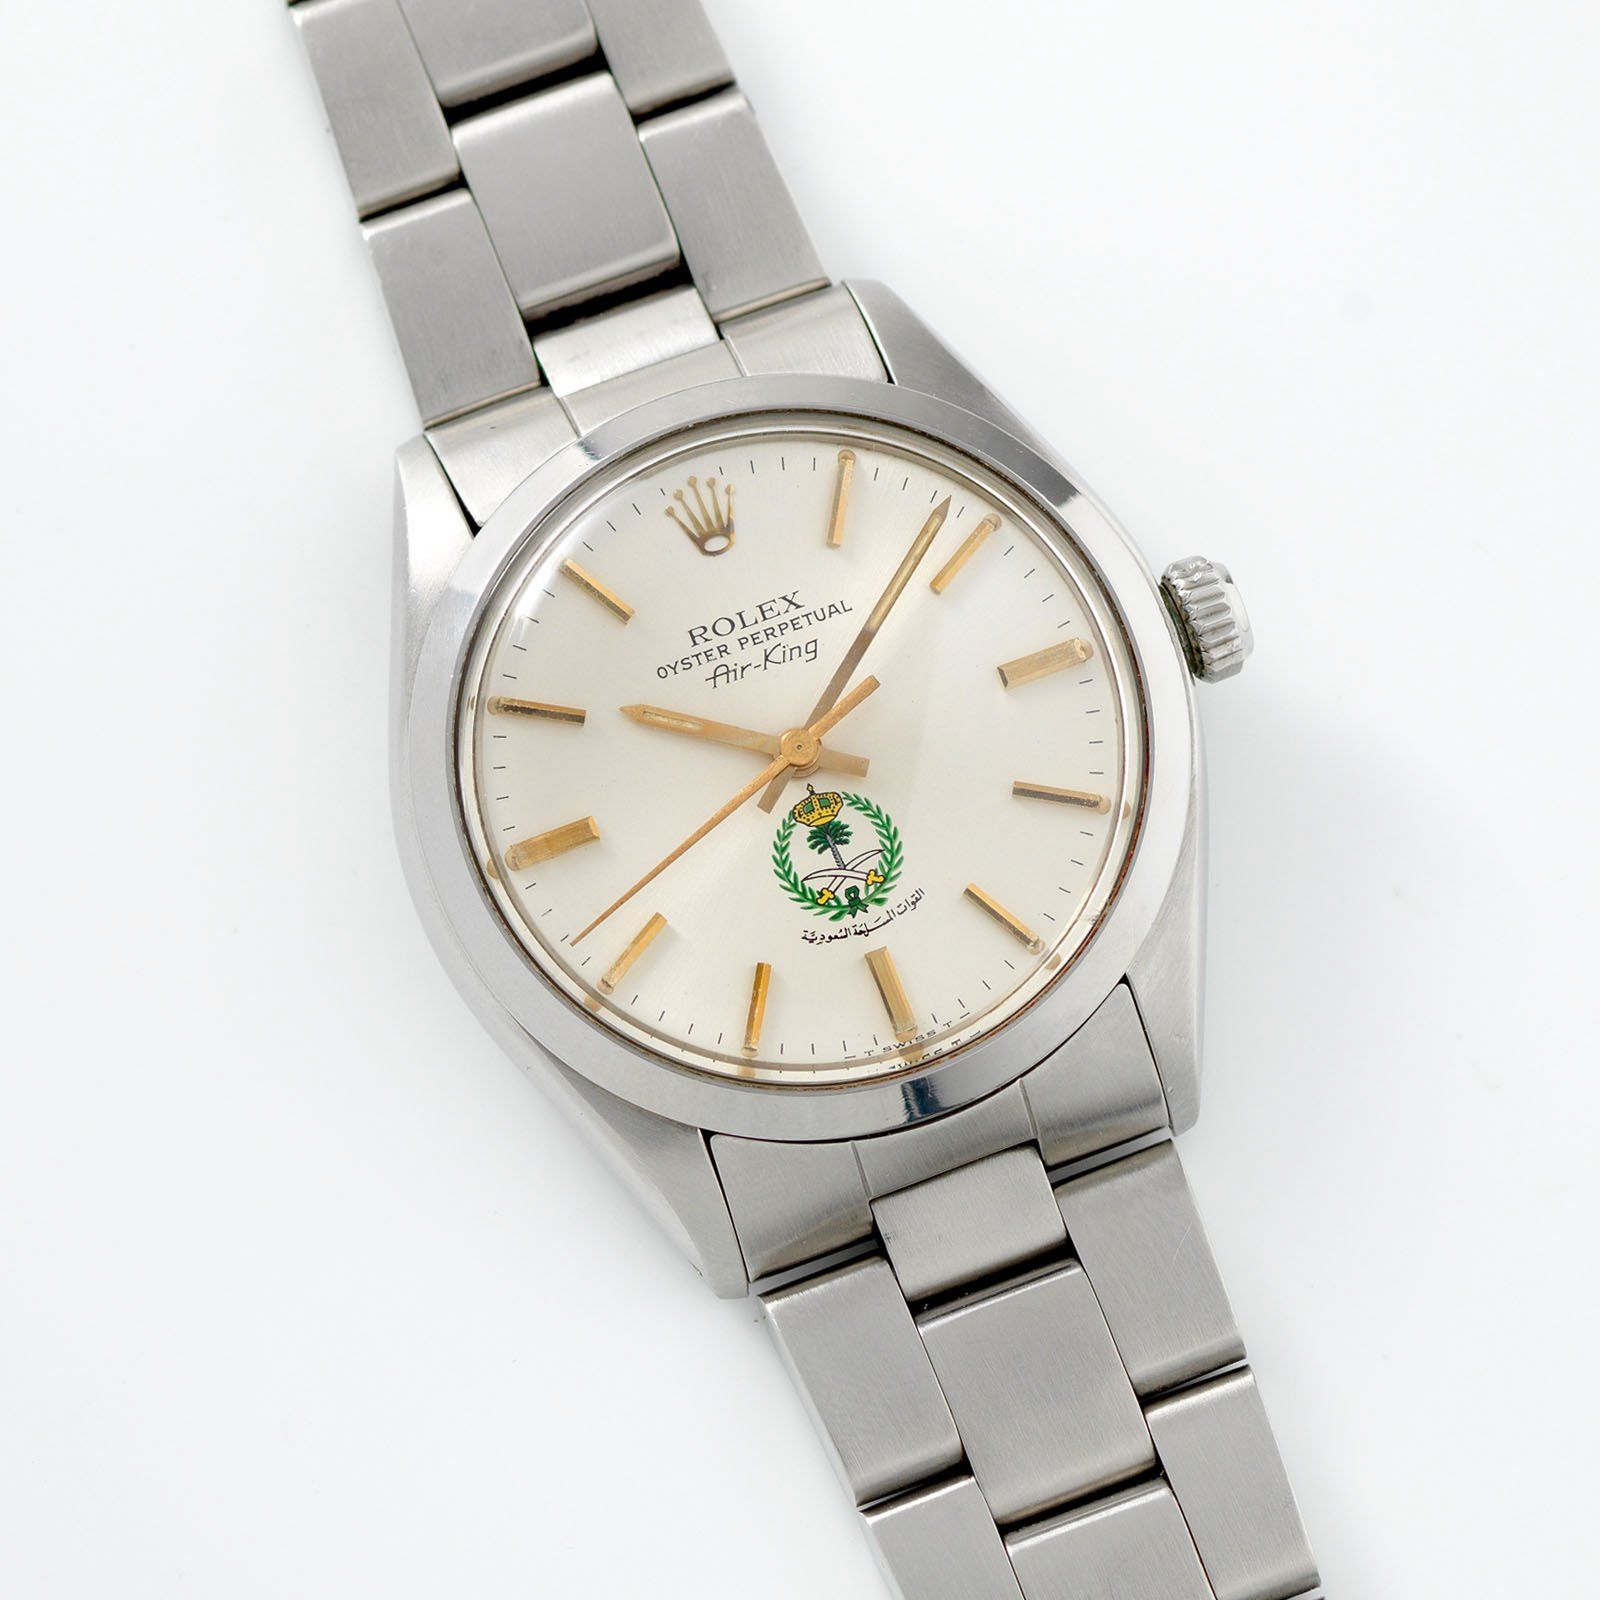 Rolex Air King Ref 5500 Royal Saudi Armed Forces Dial